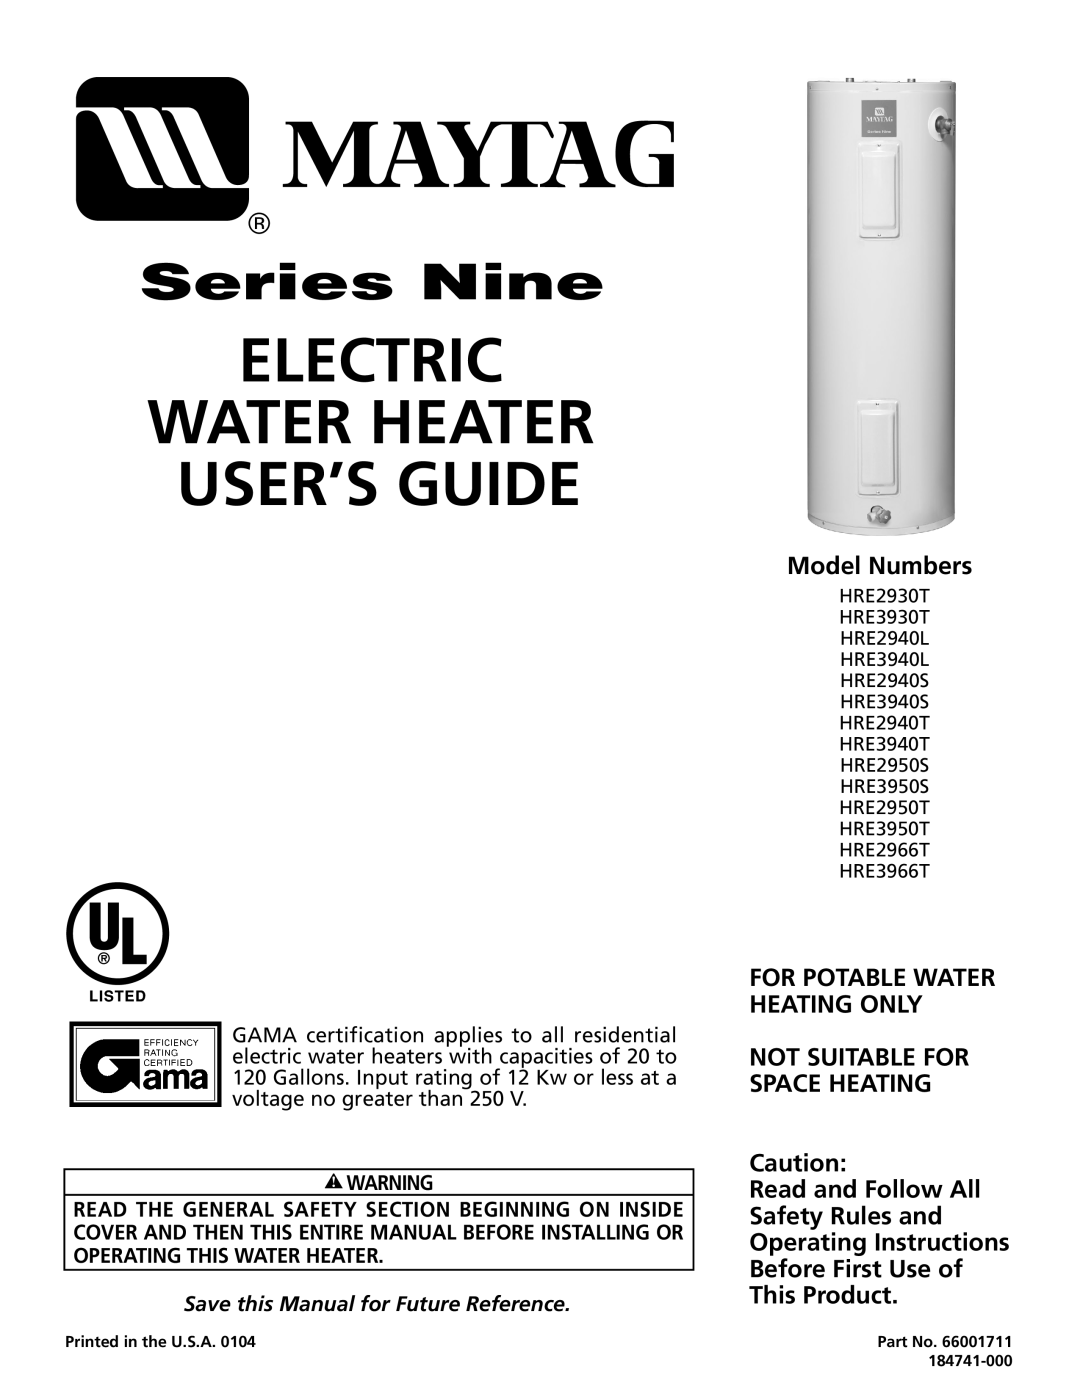 Maytag HRE3950T, HRE3966T, HRE2950T manual Electric Water Heater User’S Guide, Series Nine, Model Numbers, This Product 